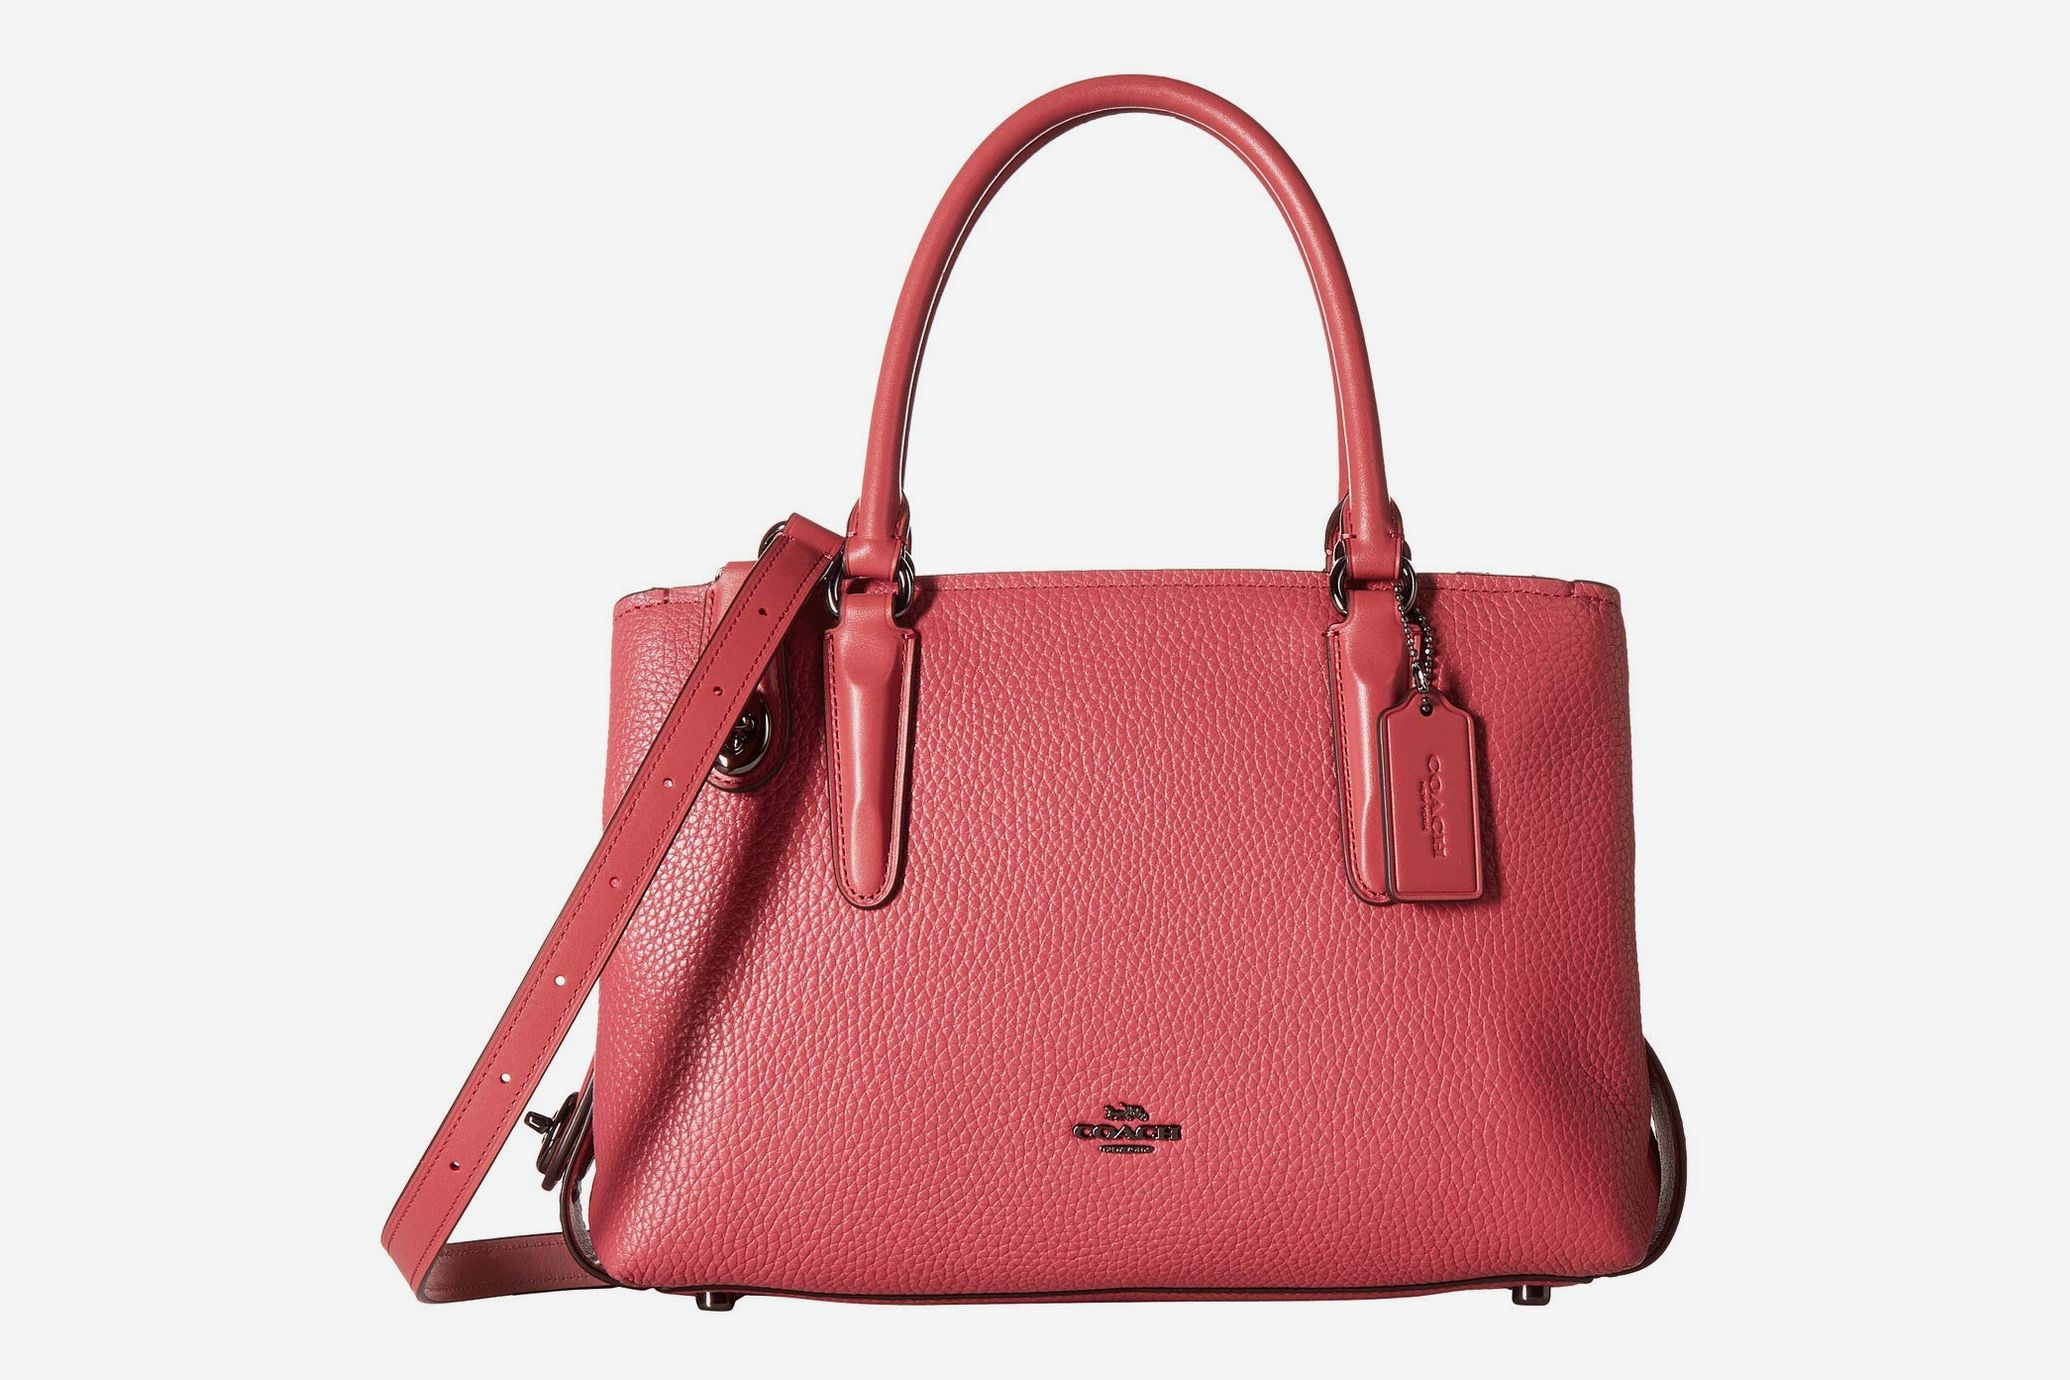 Coach Bags Sale At Zappos 2019 | The Strategist